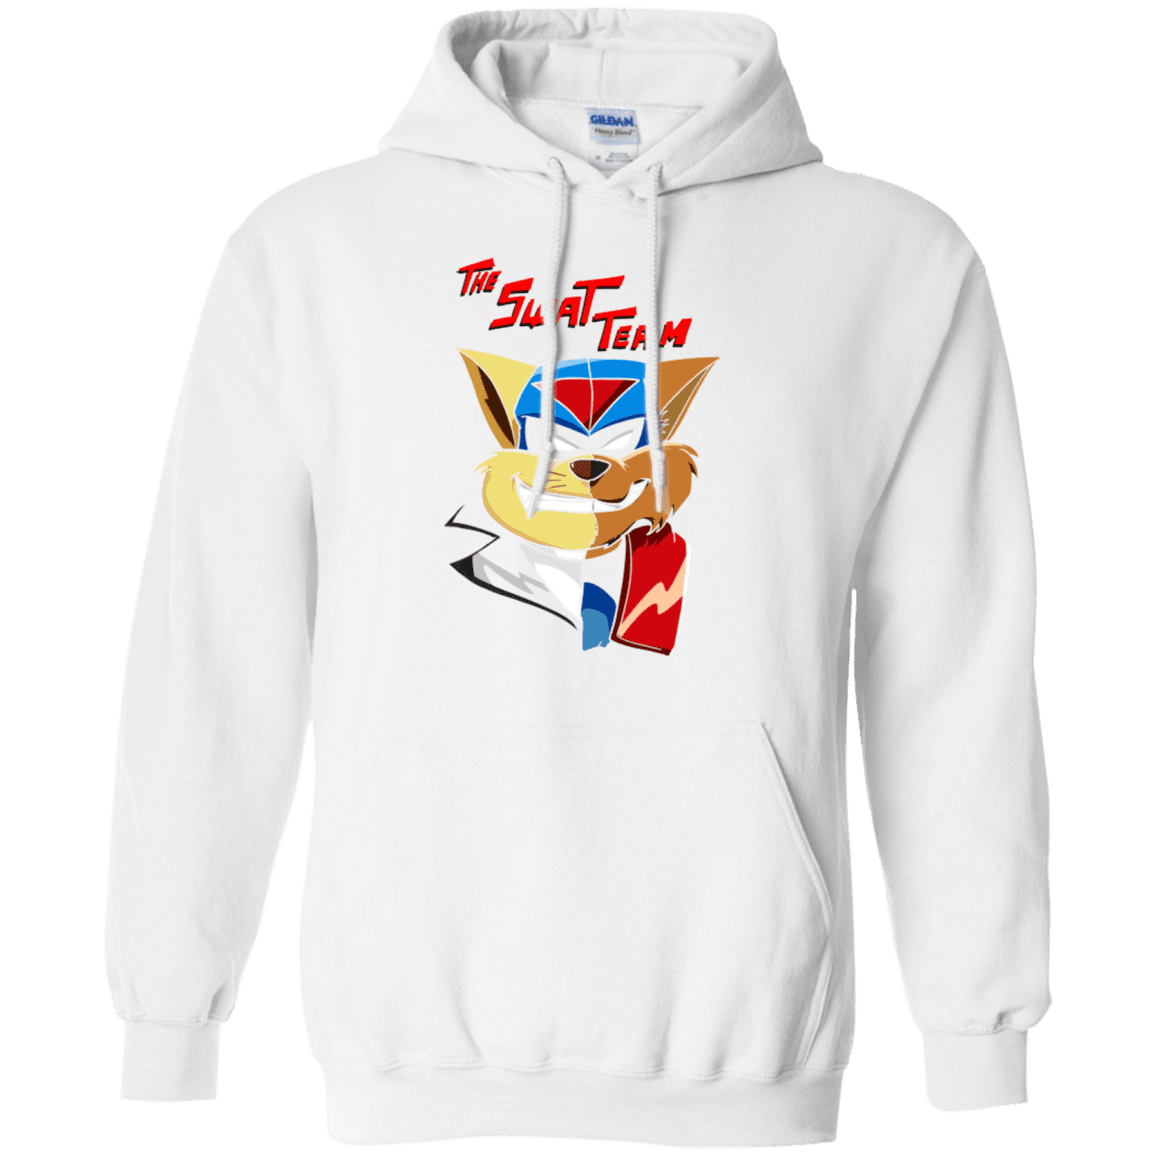 Sweatshirts White / Small The Swat Team Pullover Hoodie